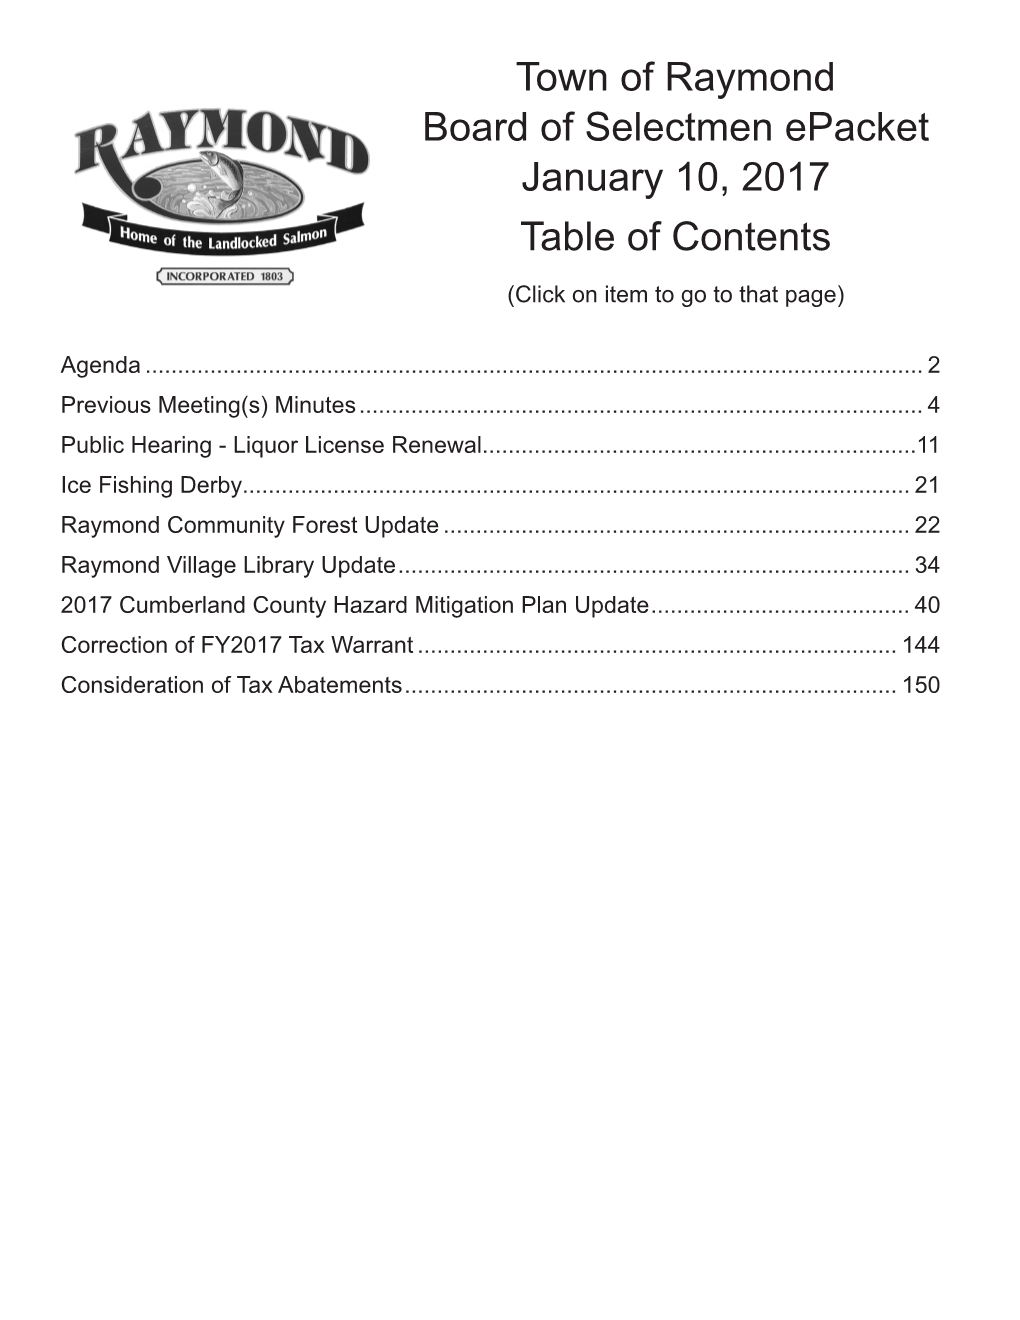 Town of Raymond Board of Selectmen Epacket January 10, 2017 Table of Contents (Click on Item to Go to That Page)